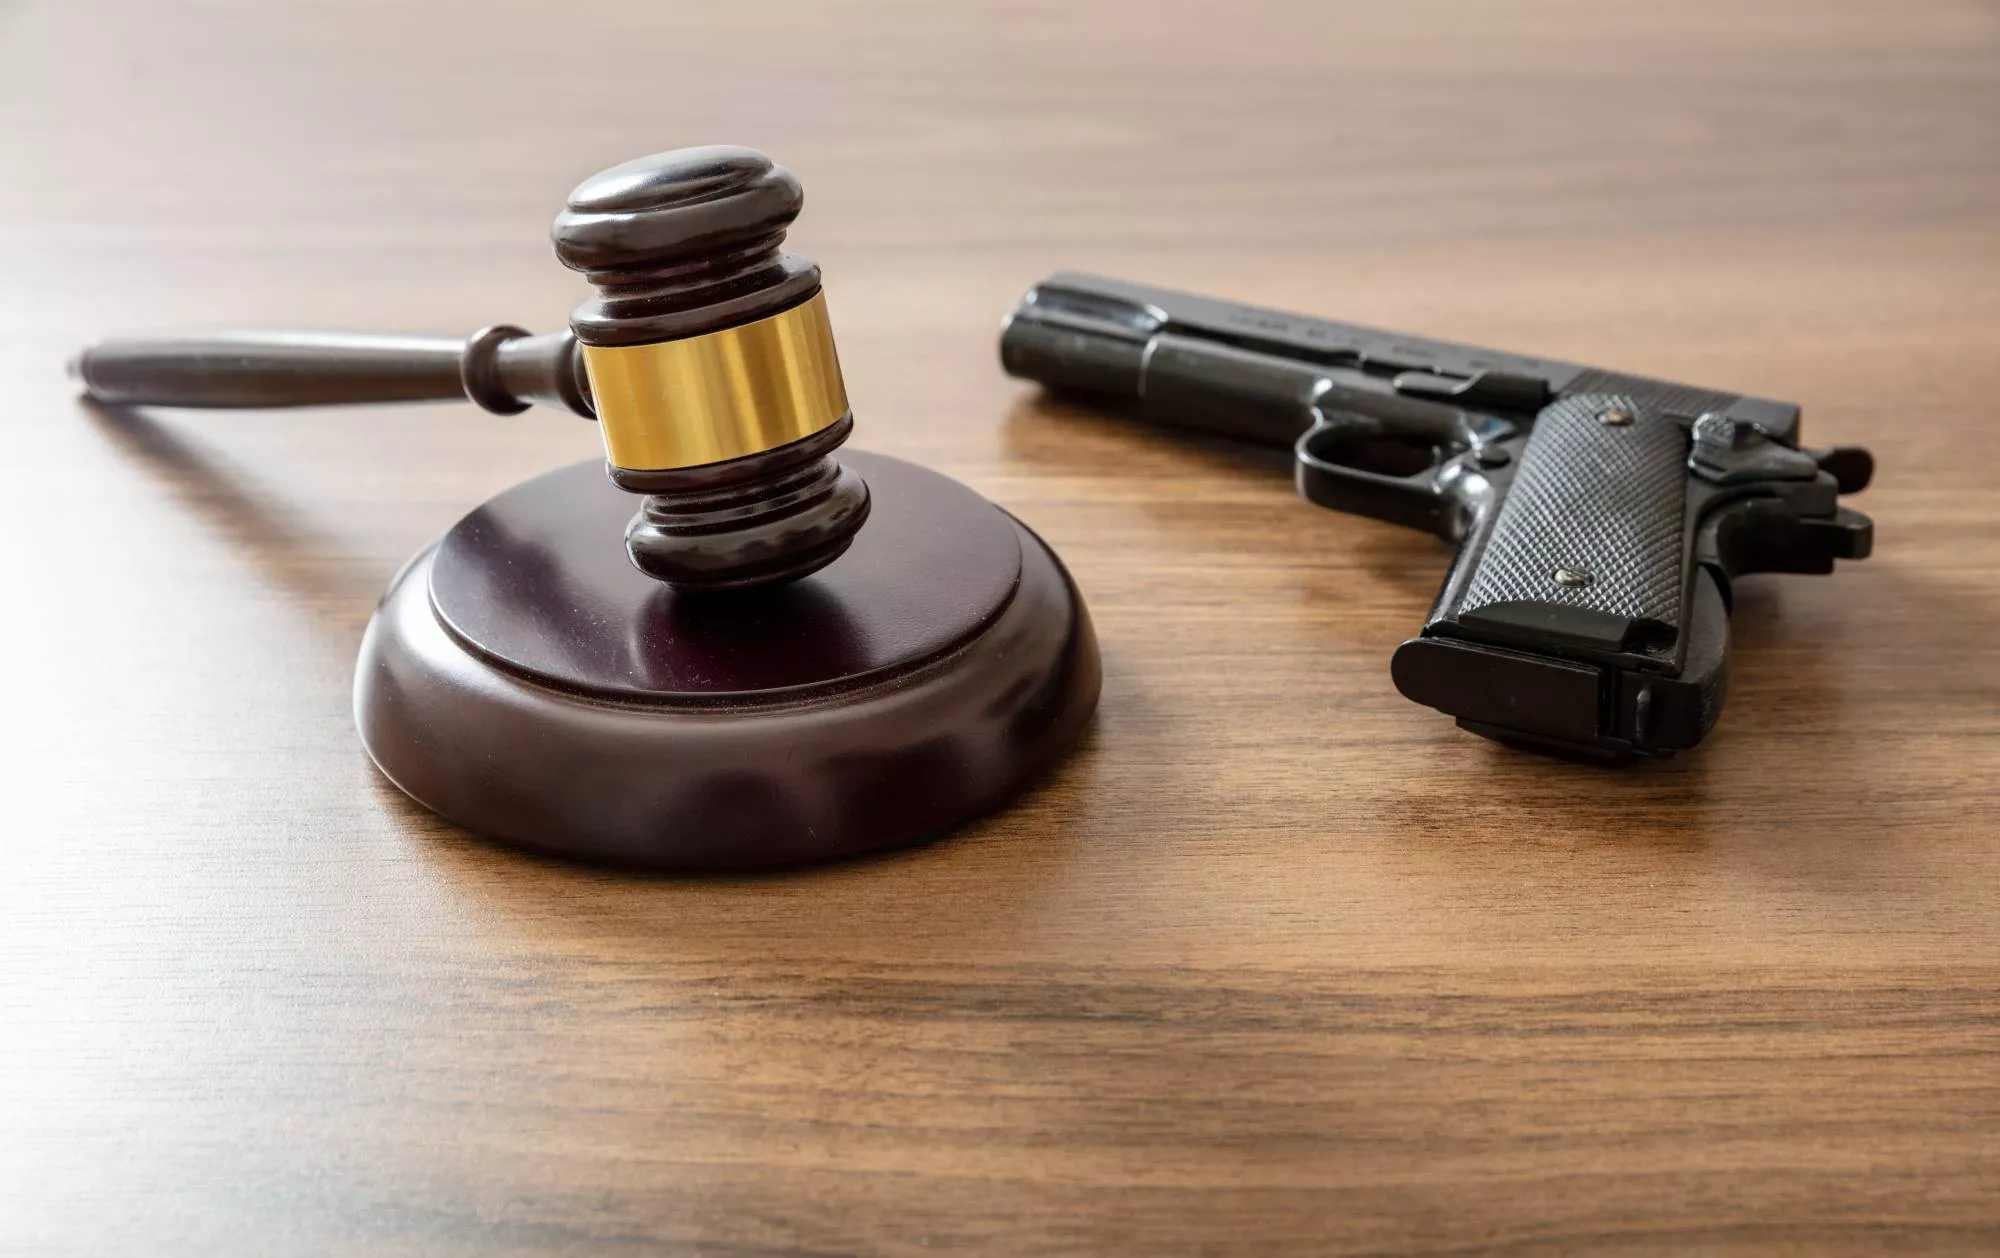 judge's gavel and gun on wooden desk symbolizing the question of how old do you have to be to buy a gun in the US